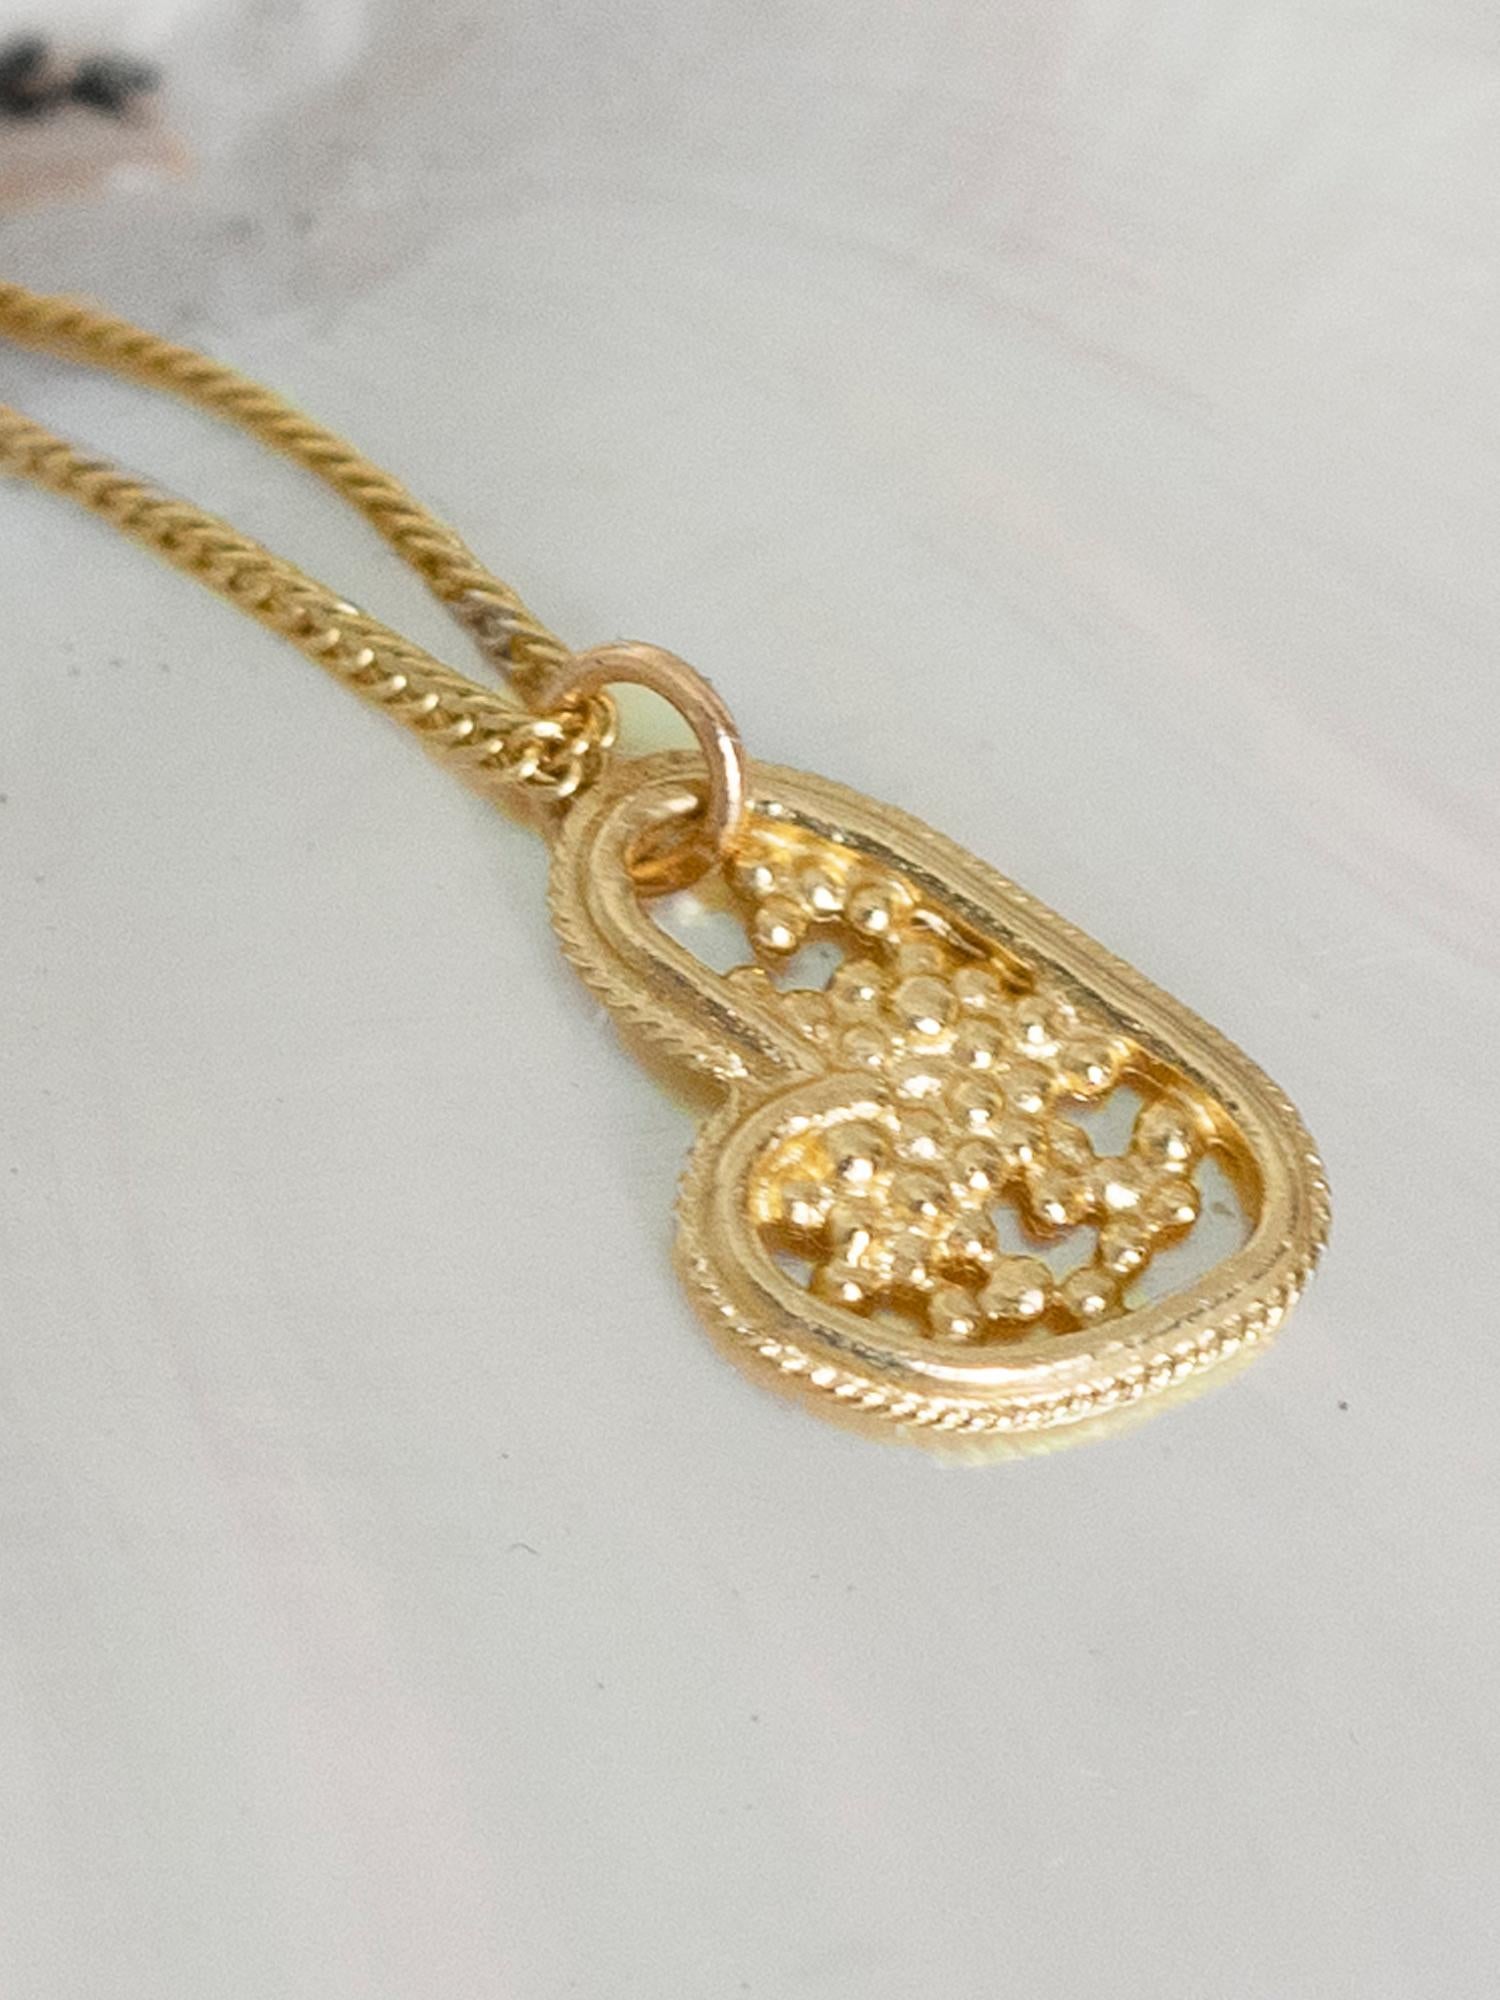 14 Karat Gold Heart Shaped Filigree Pendant Necklace by Mon Pilar 16 Inches In New Condition For Sale In Brooklyn, NY